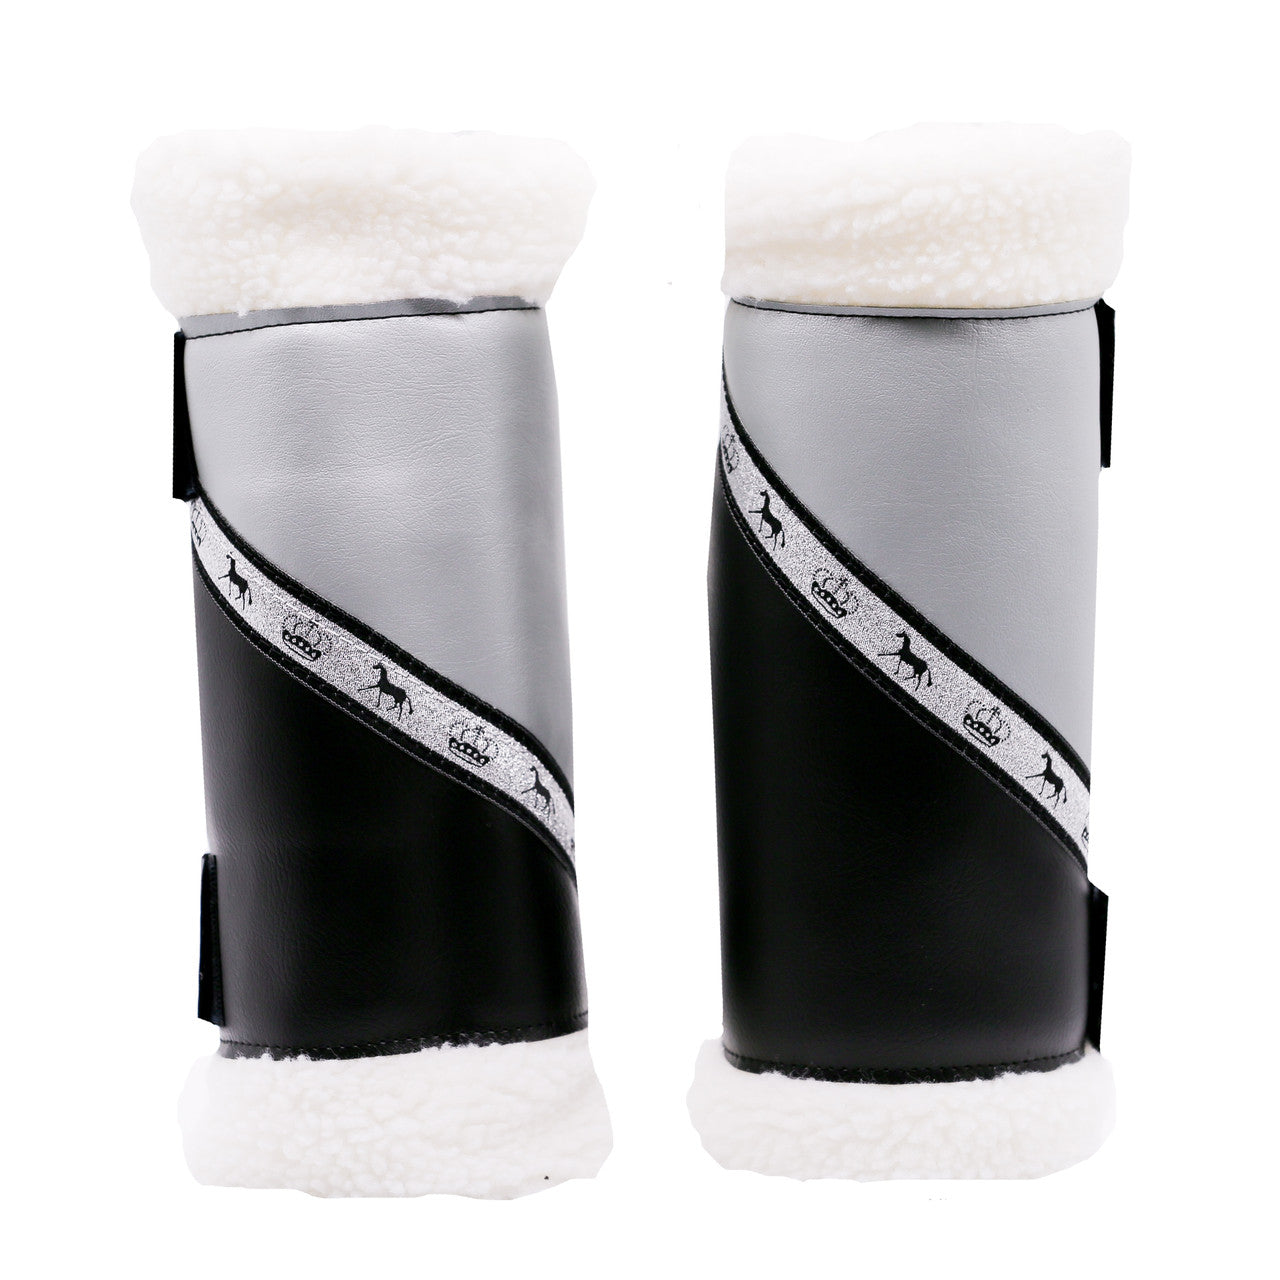 Sherpa Boots - Black & Silver - Pair - Made to order